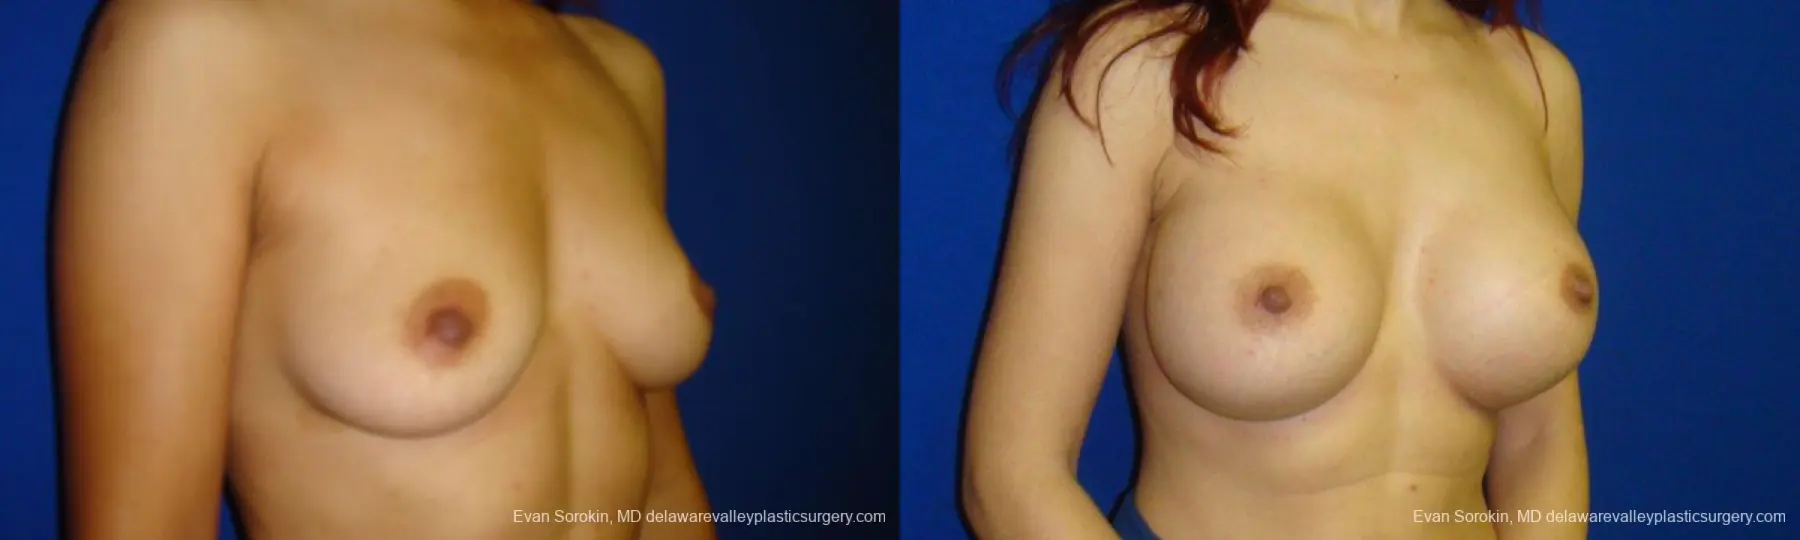 Philadelphia Breast Augmentation 9294 - Before and After 4